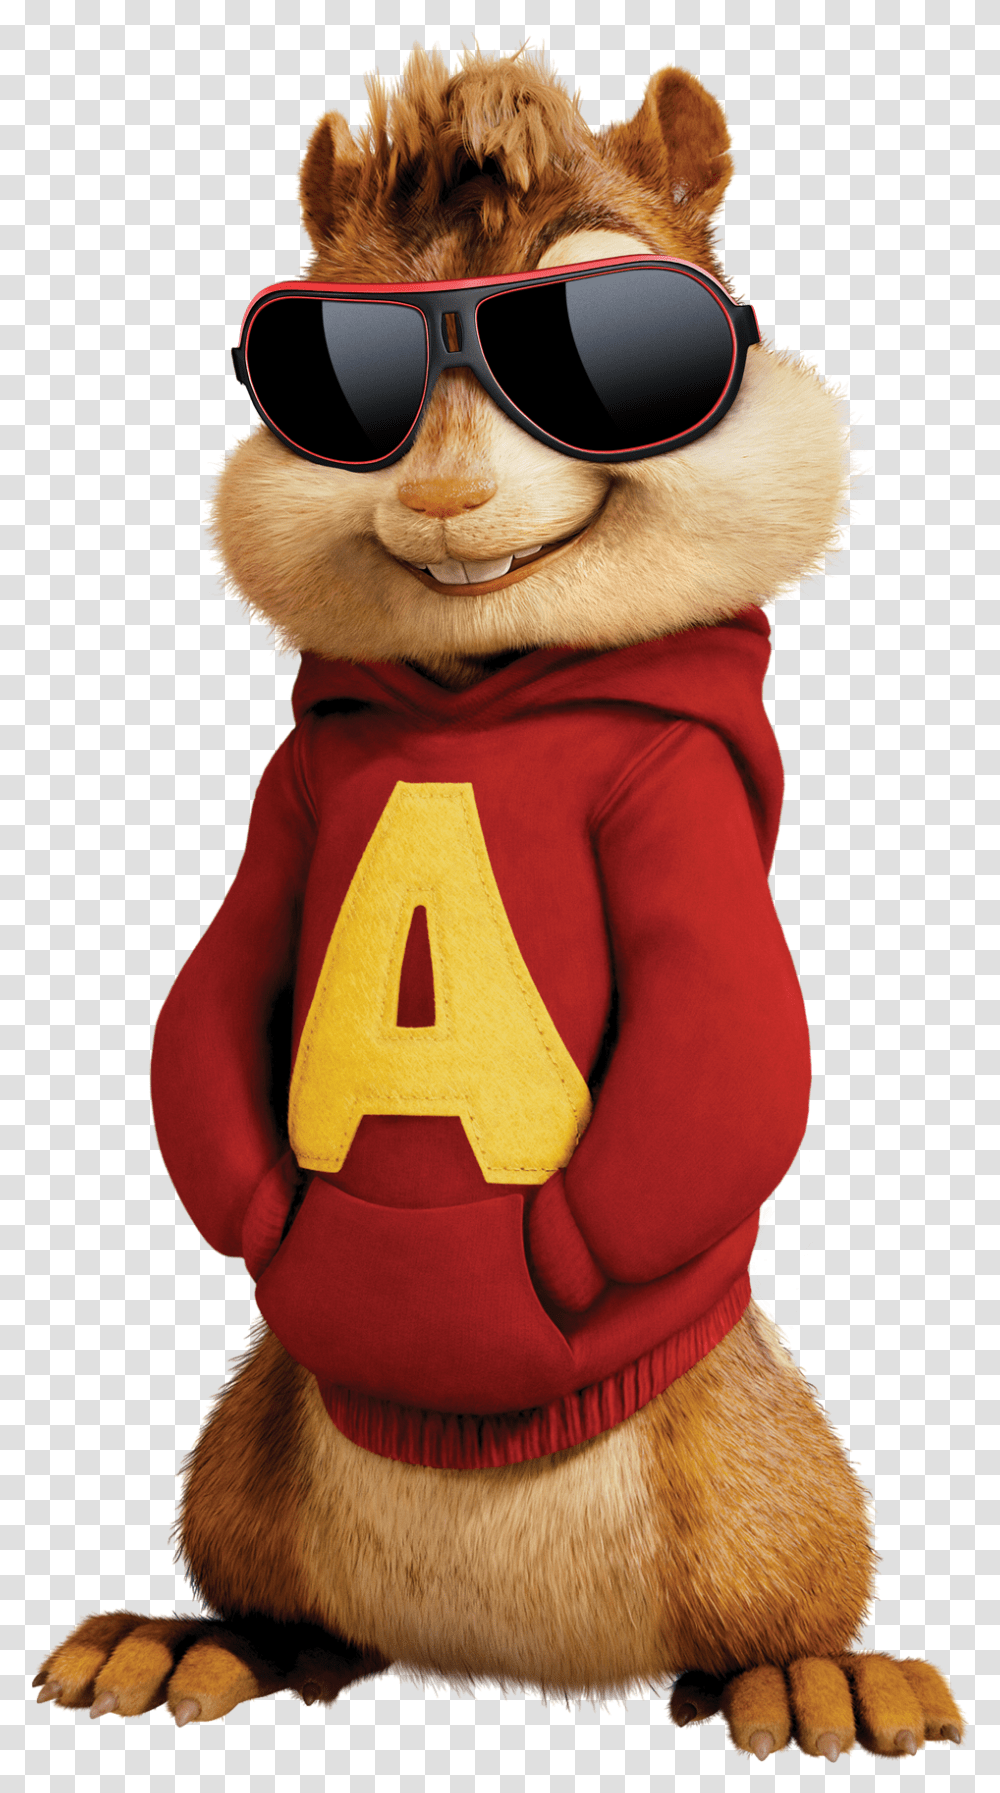 Images Pngs Alvin And The Chipmunks Chipmunks Alvin And The Chipmunks Selfie, Sunglasses, Accessories, Accessory Transparent Png